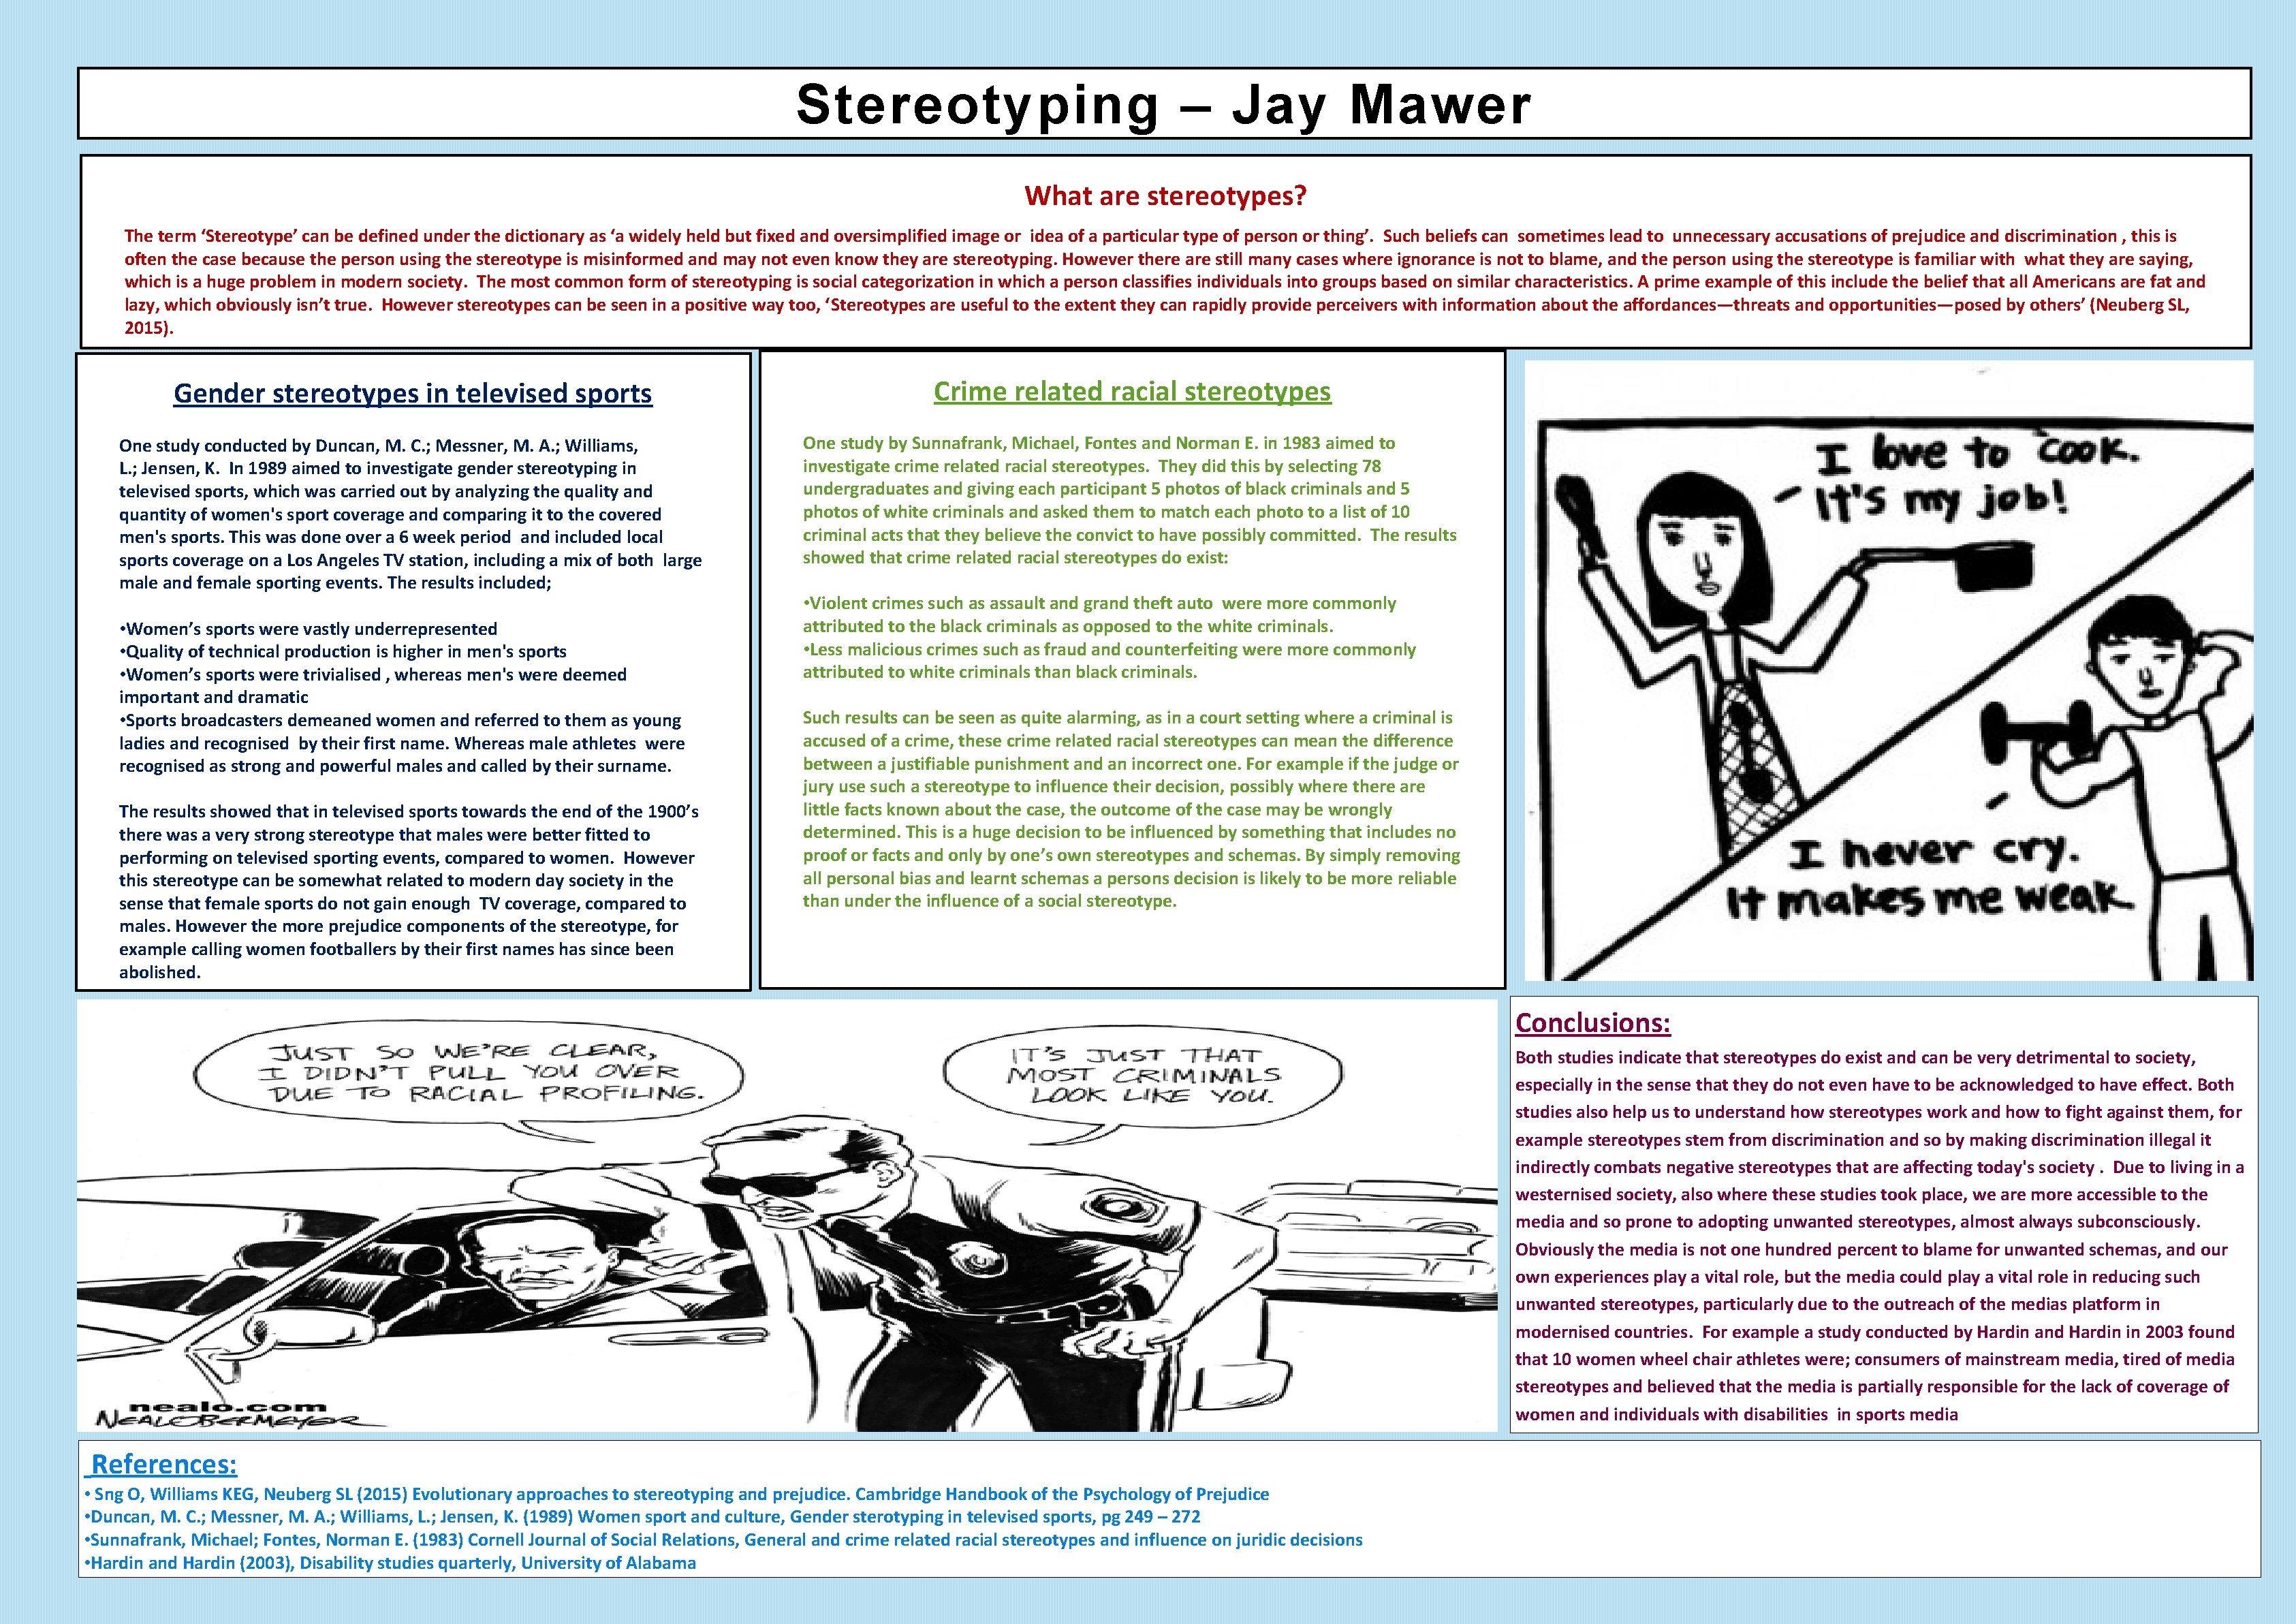 Stereotyping – Jay Mawer What are stereotypes? The term ‘Stereotype’ can be defined under